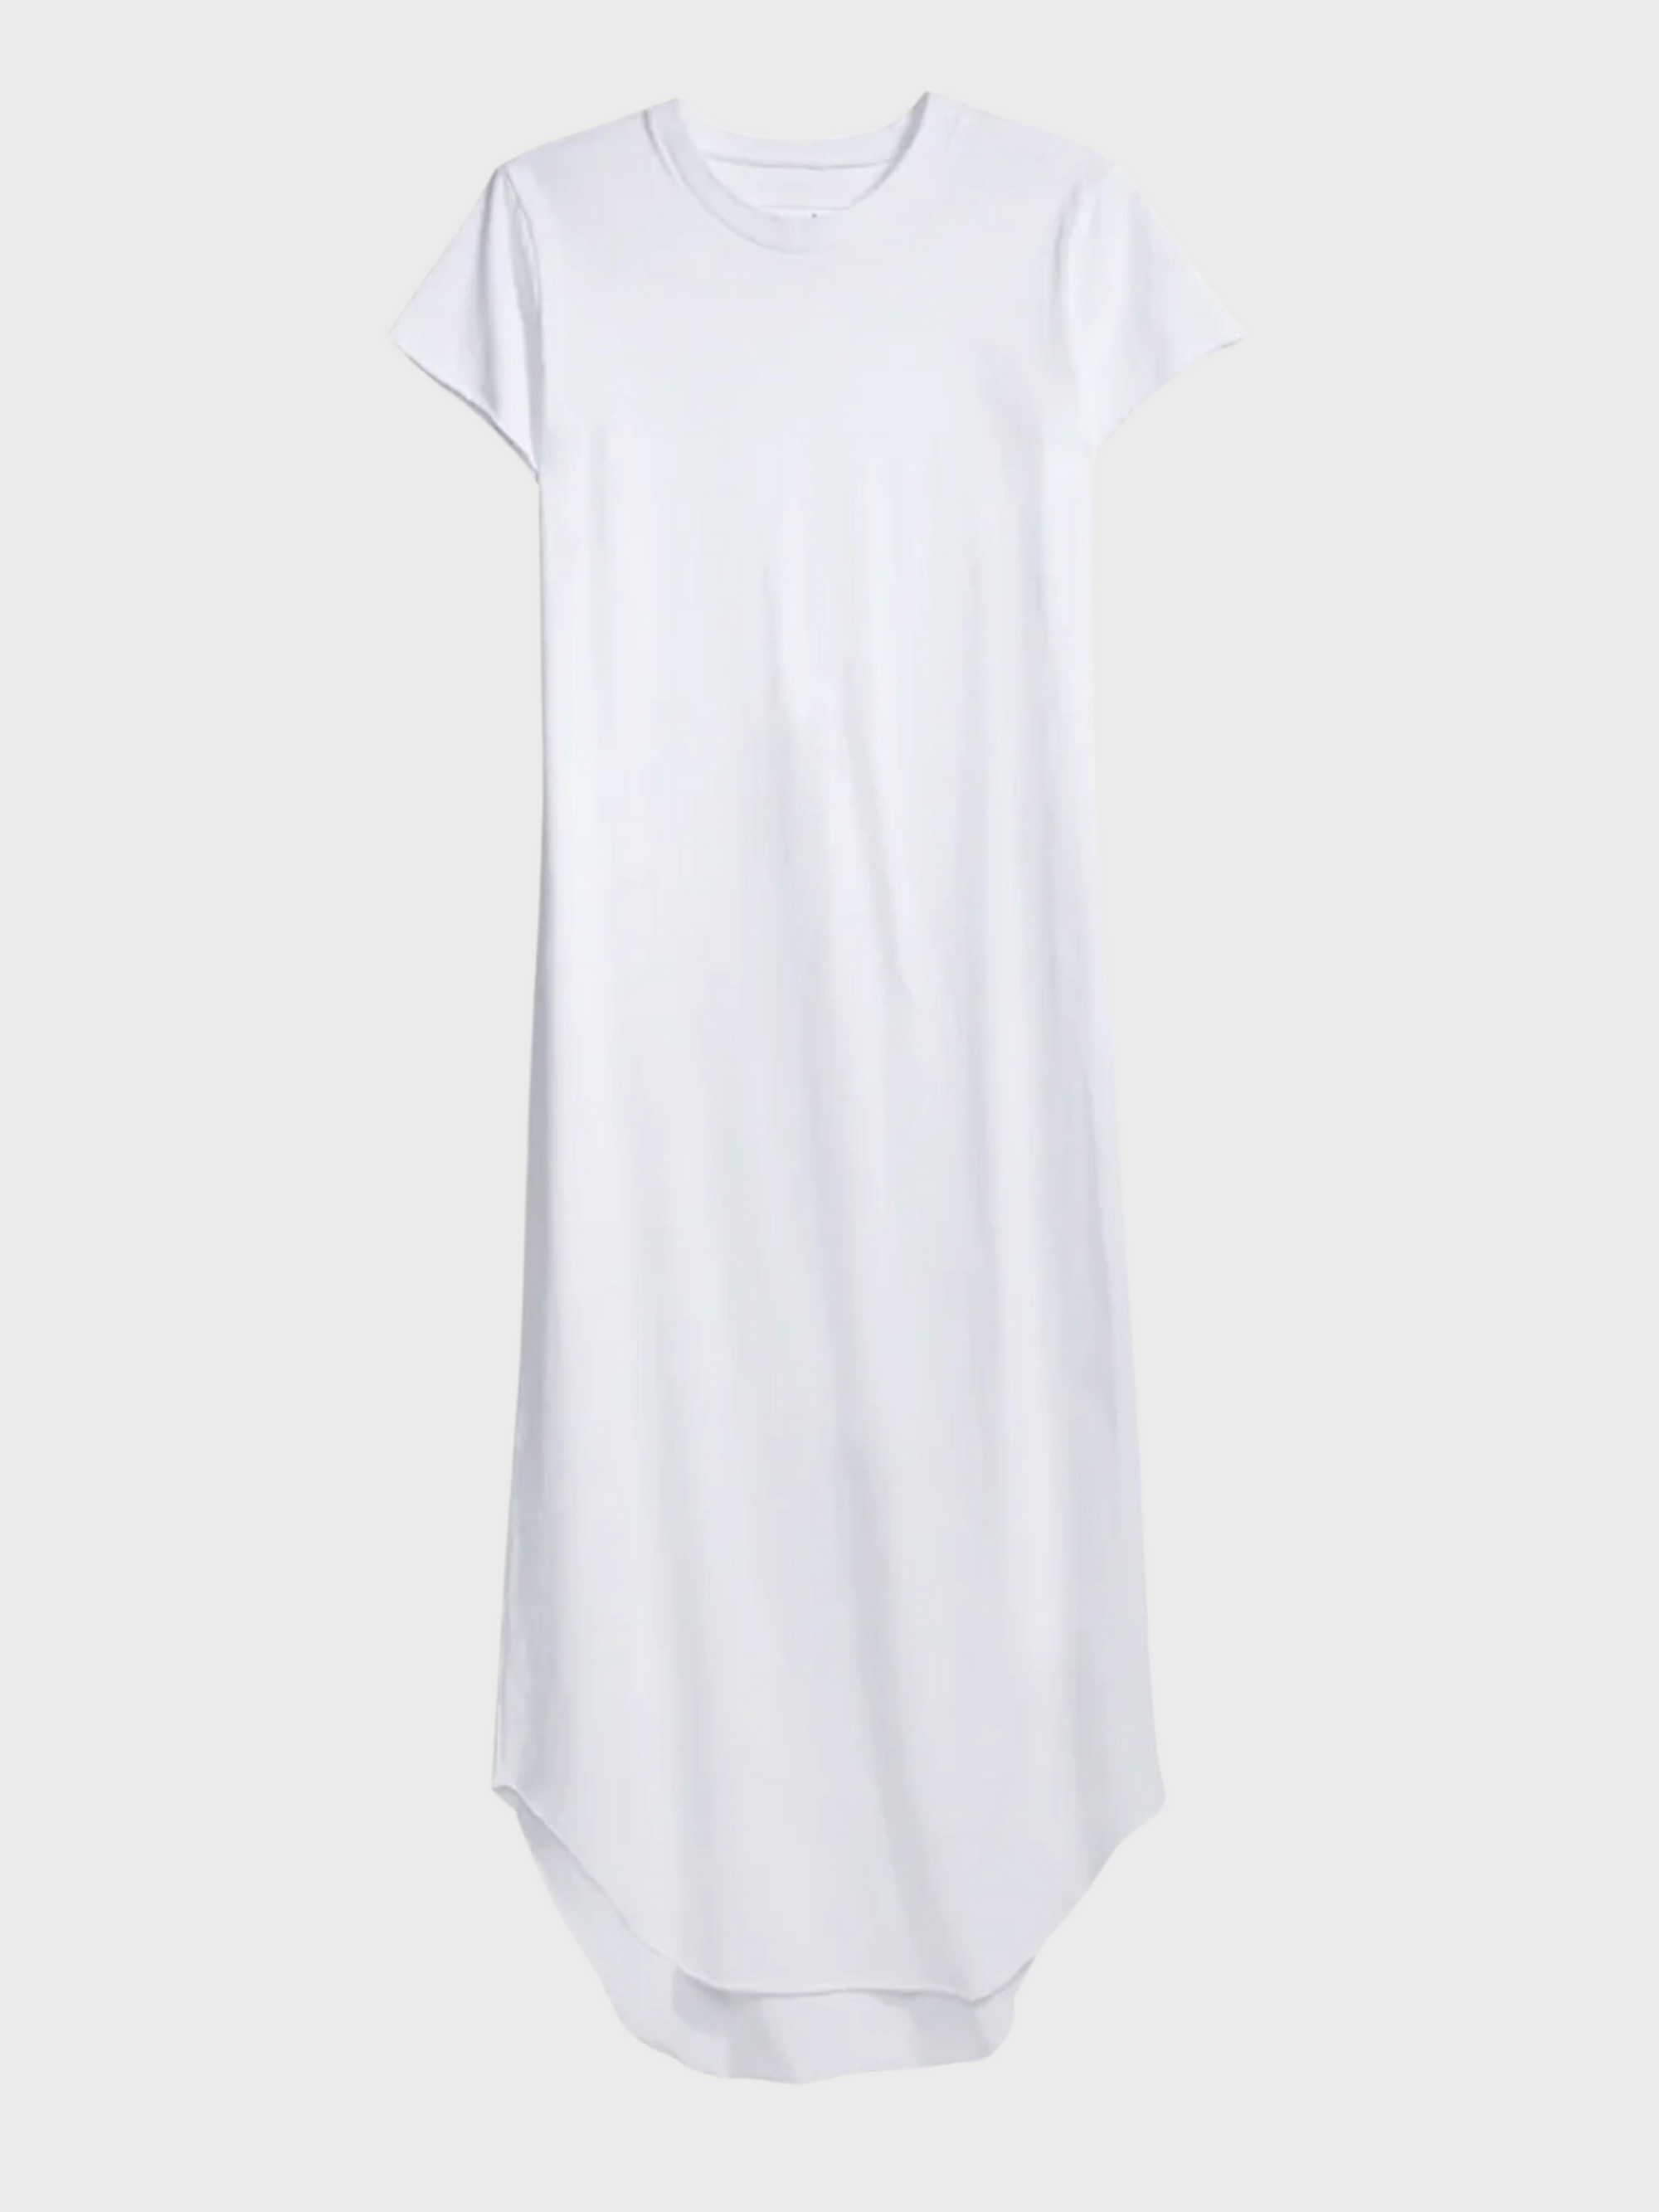 Frank & Eileen Harper Perfect Tee Maxi Dress- White-Dresses-West of Woodward Boutique-Vancouver-Canada